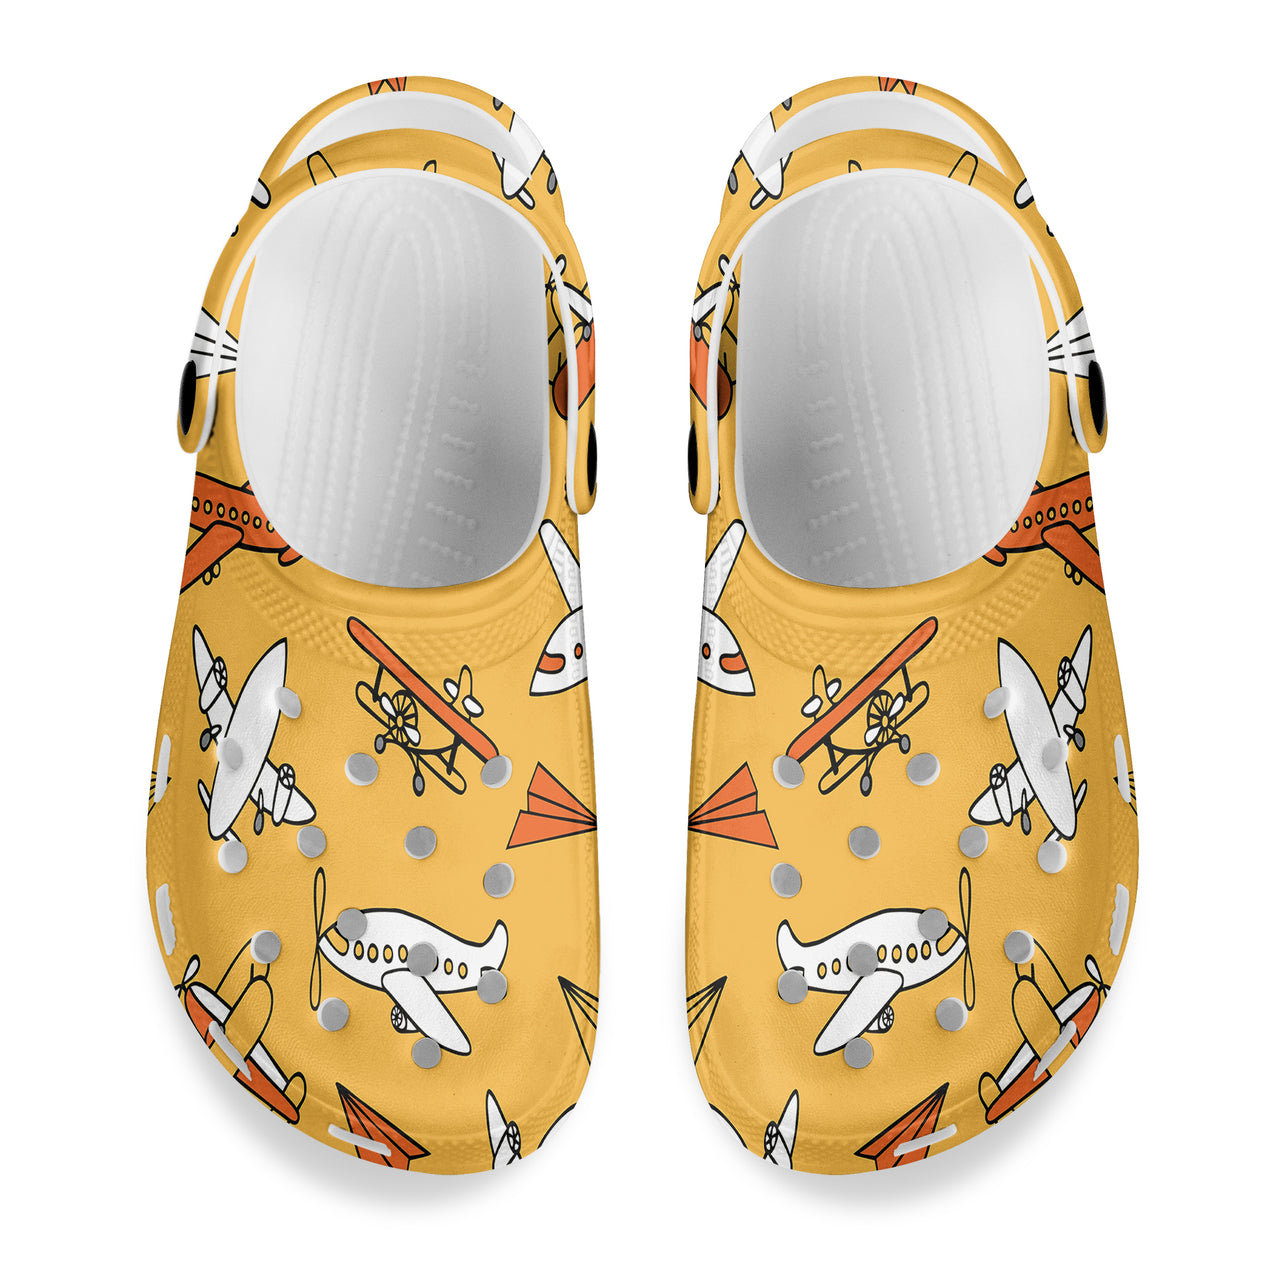 Super Drawings of Airplanes Designed Hole Shoes & Slippers (MEN)